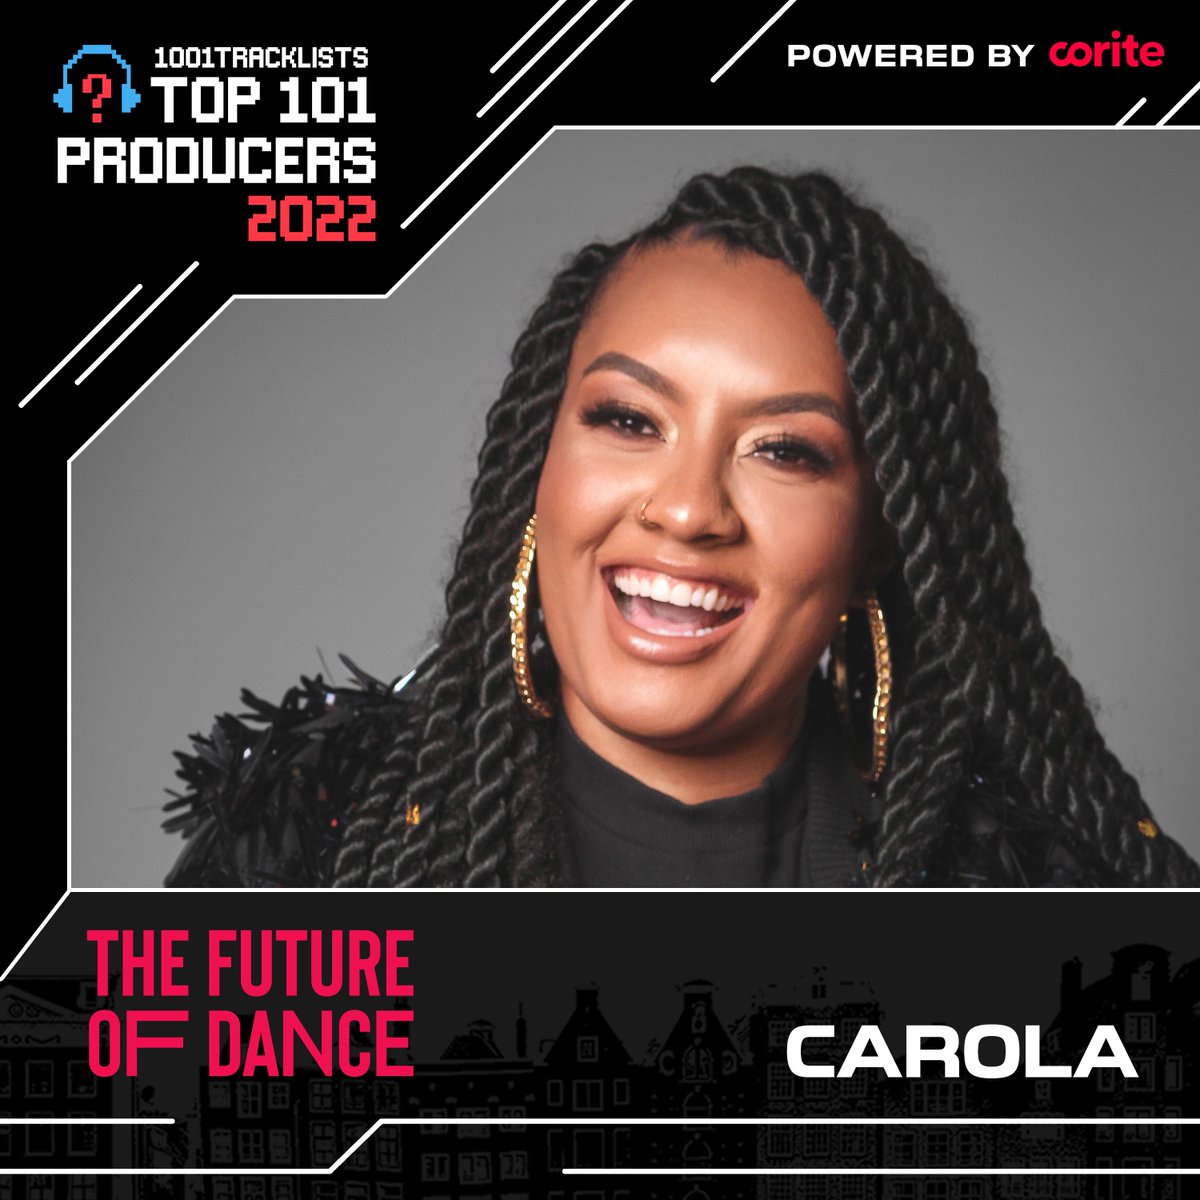 .@listentocarola is a Brazilian artist on the rise with a growing catalog of releases on @Armada, @AtlanticRecords, @sonymusic and @stmpdrcrds. #TheFutureOfDance2022 #Top101Producers2022